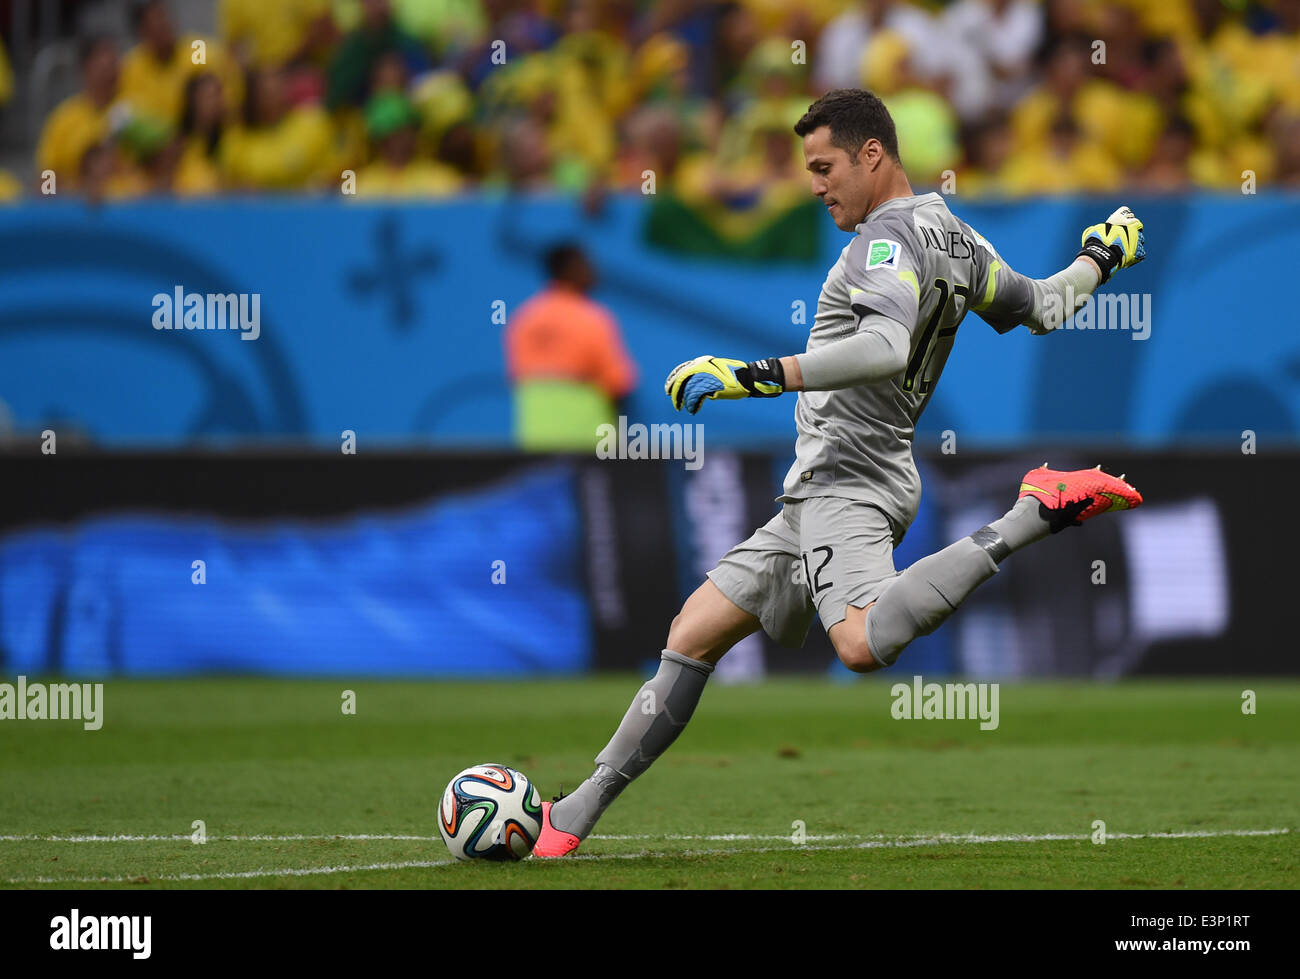 Brazil's goalkeeper Julio Cesar plays the ball during the FIFA World Cup 2014 group A preliminary round match between Cameroon and Brazil at the Estadio Nacional in Brasilia, Brazil, 23 June 2014. Photo: Marius Becker/dpa (RESTRICTIONS APPLY: Editorial Use Only, not used in association with any commercial entity - Images must not be used in any form of alert service or push service of any kind including via mobile alert services, downloads to mobile devices or MMS messaging - Images must appear as still images and must not emulate match action video footage - No alteration is made to, and no t Stock Photo